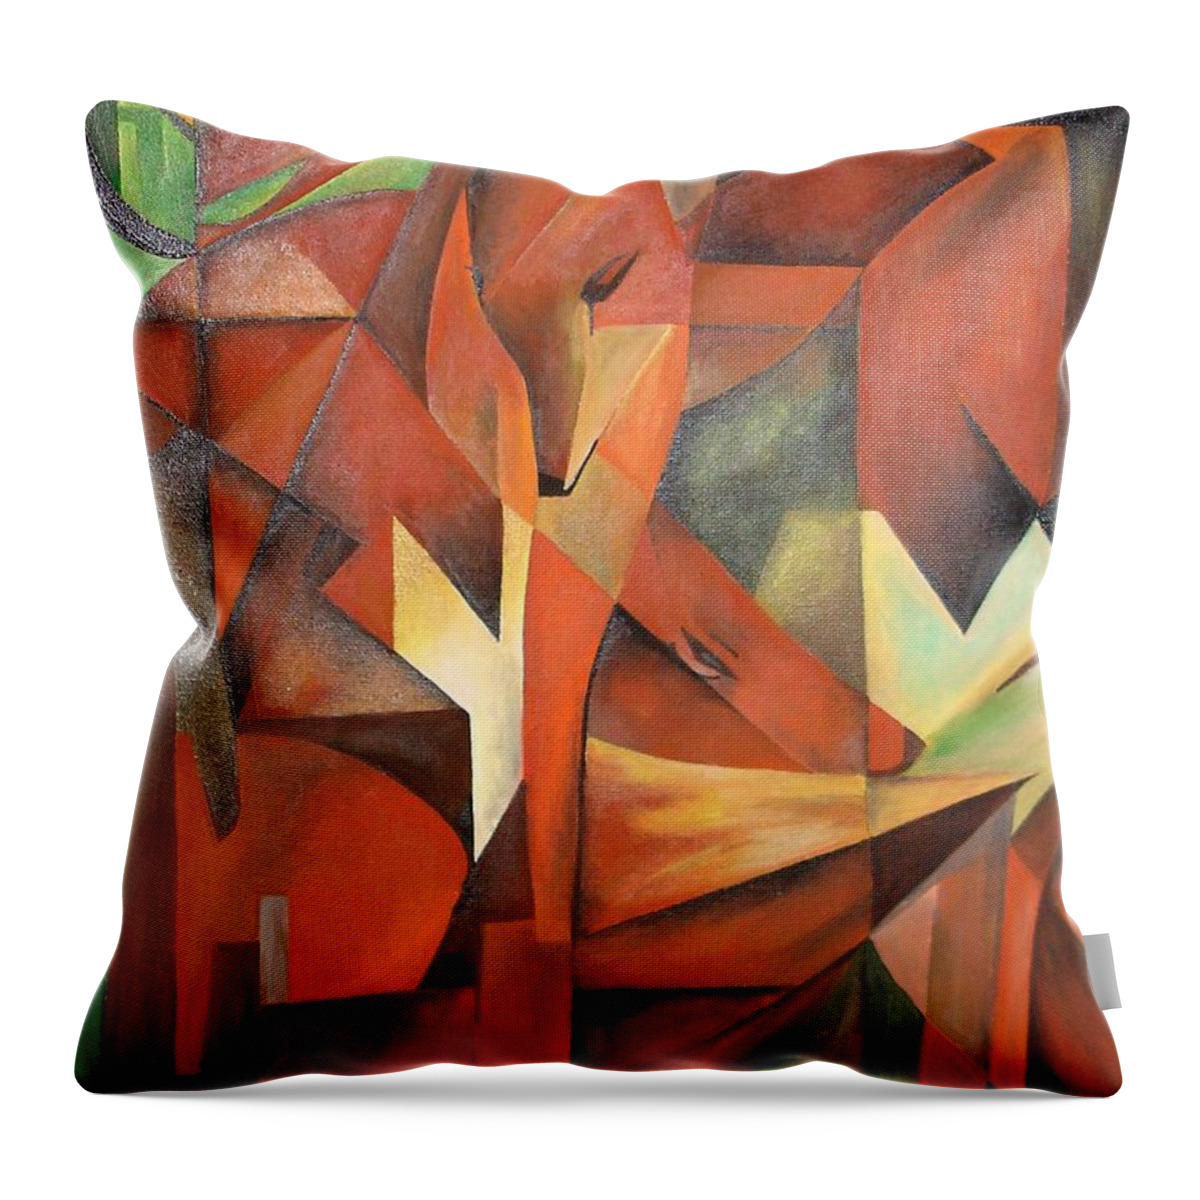 Abstract Throw Pillow featuring the painting Foxes by Taiche Acrylic Art